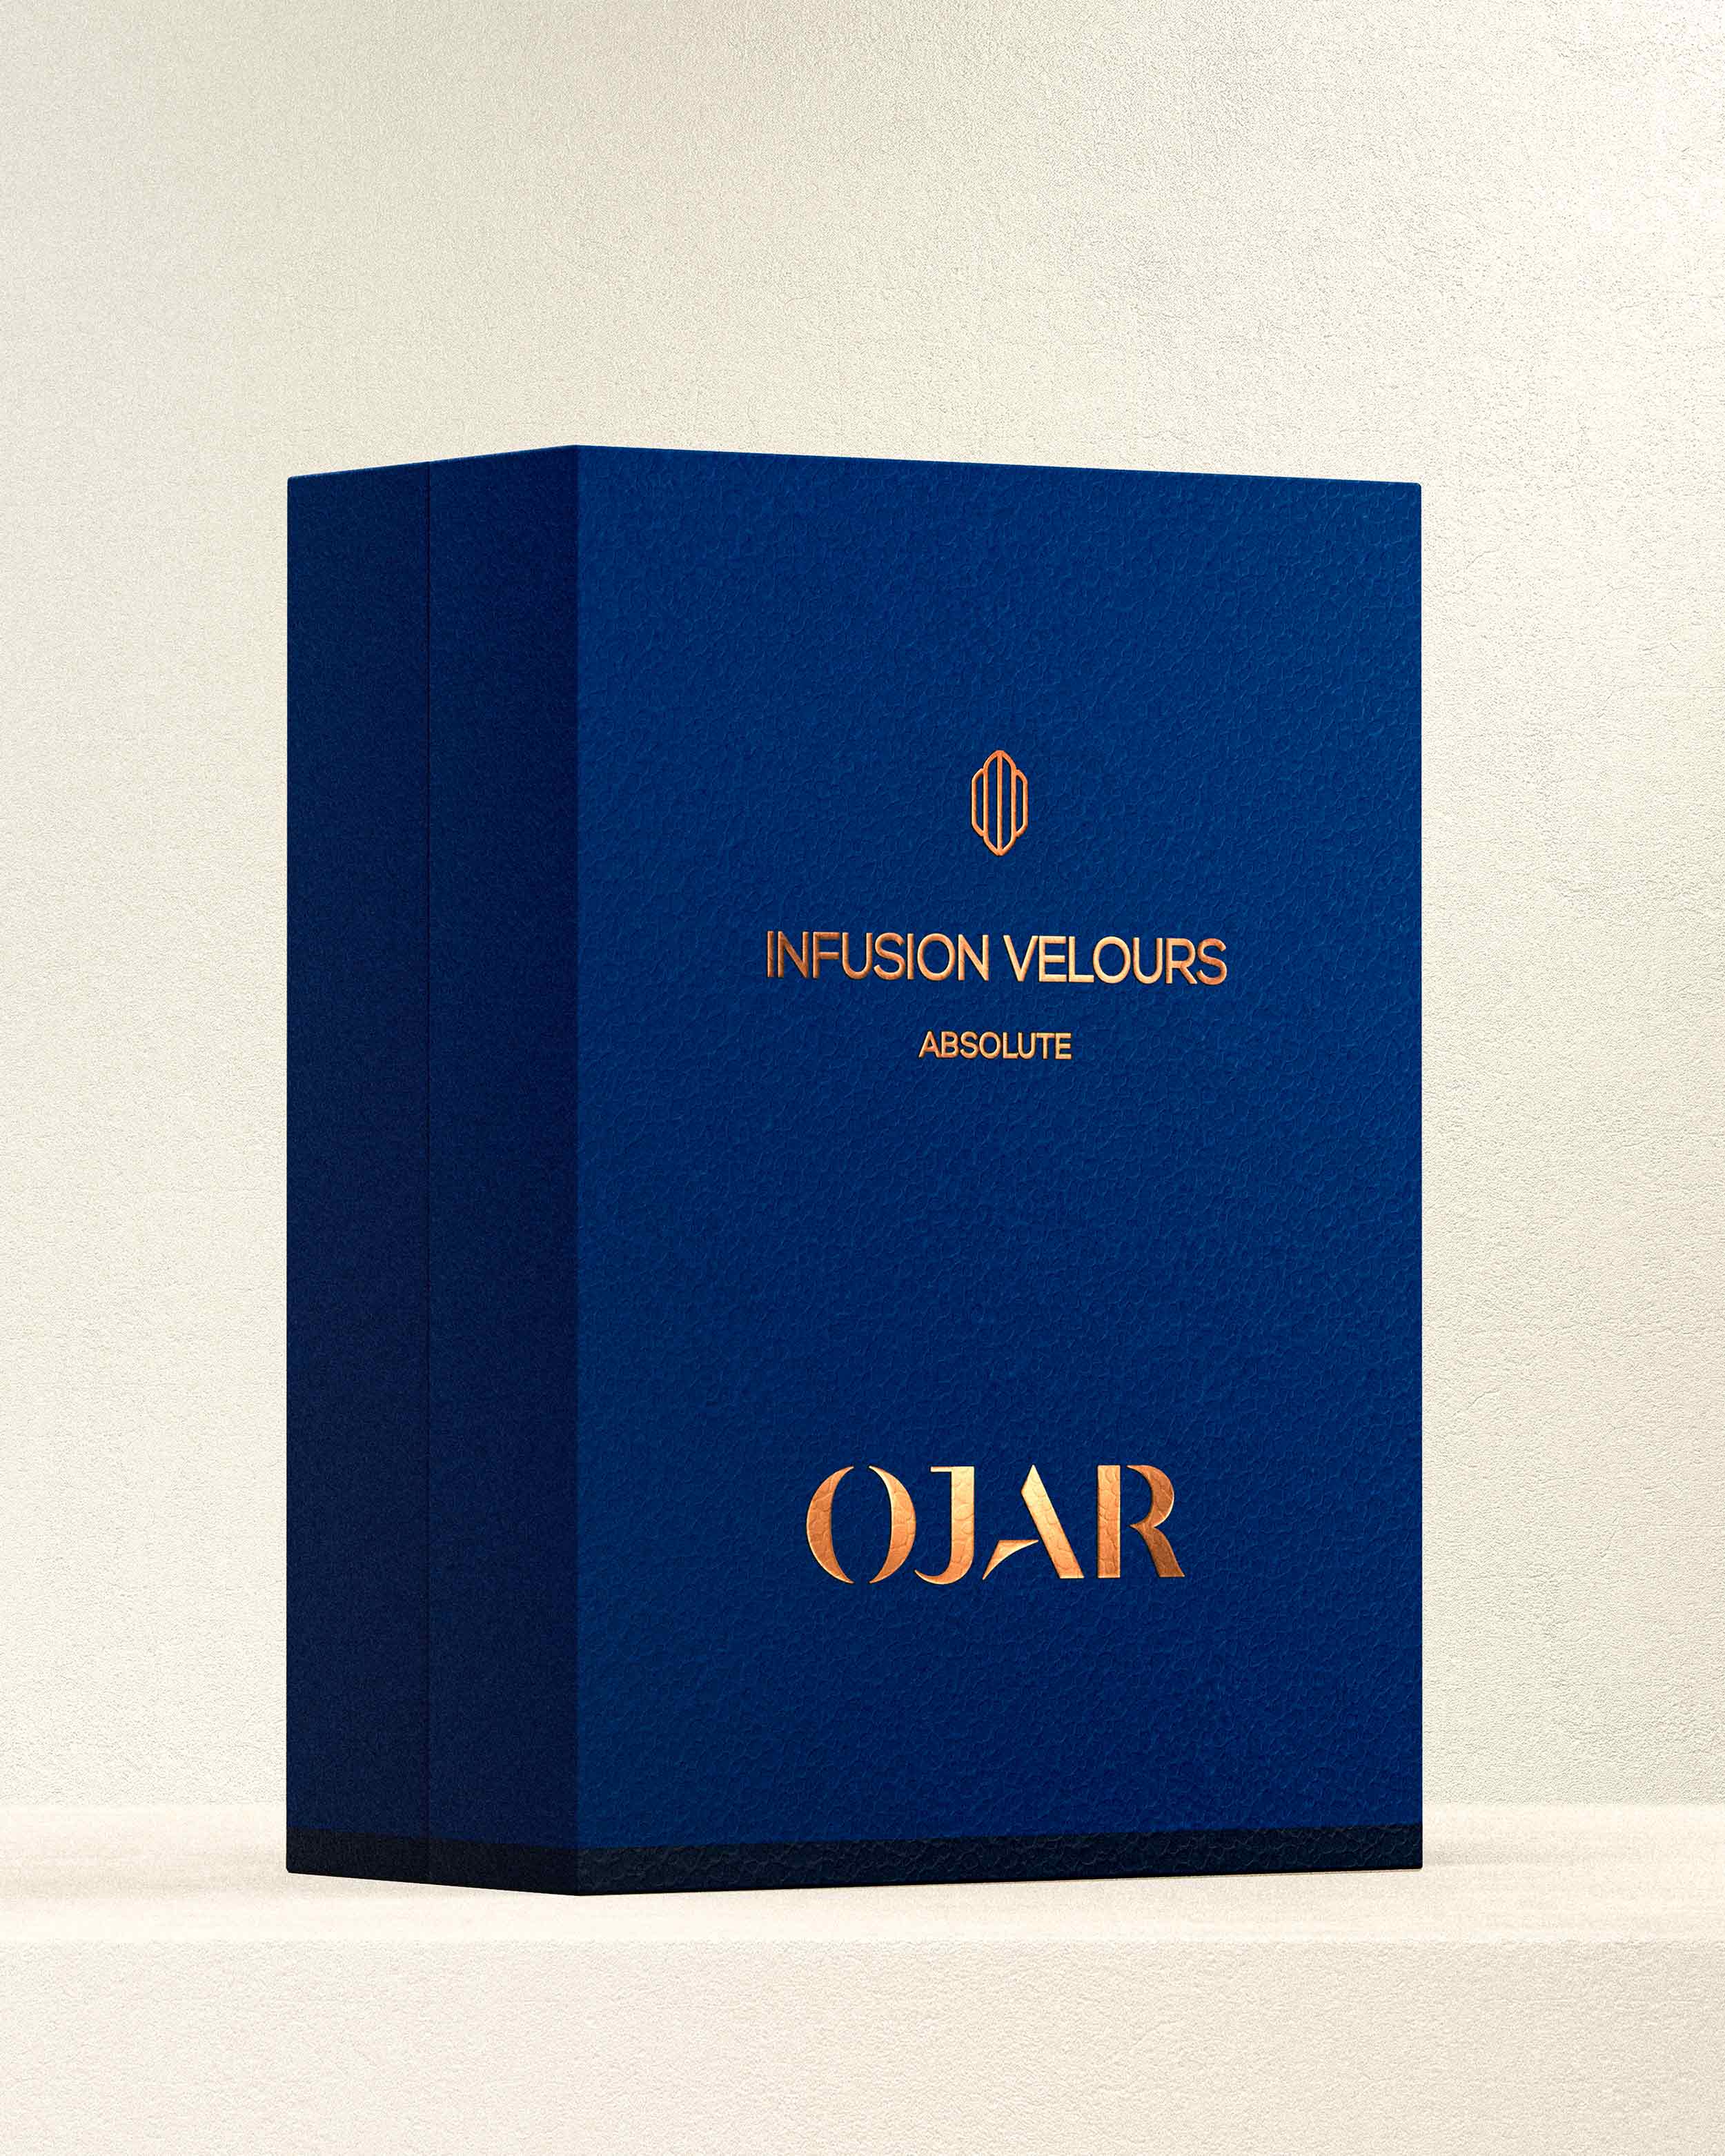 OJAR Absolute Infusion Velours Perfume Pack